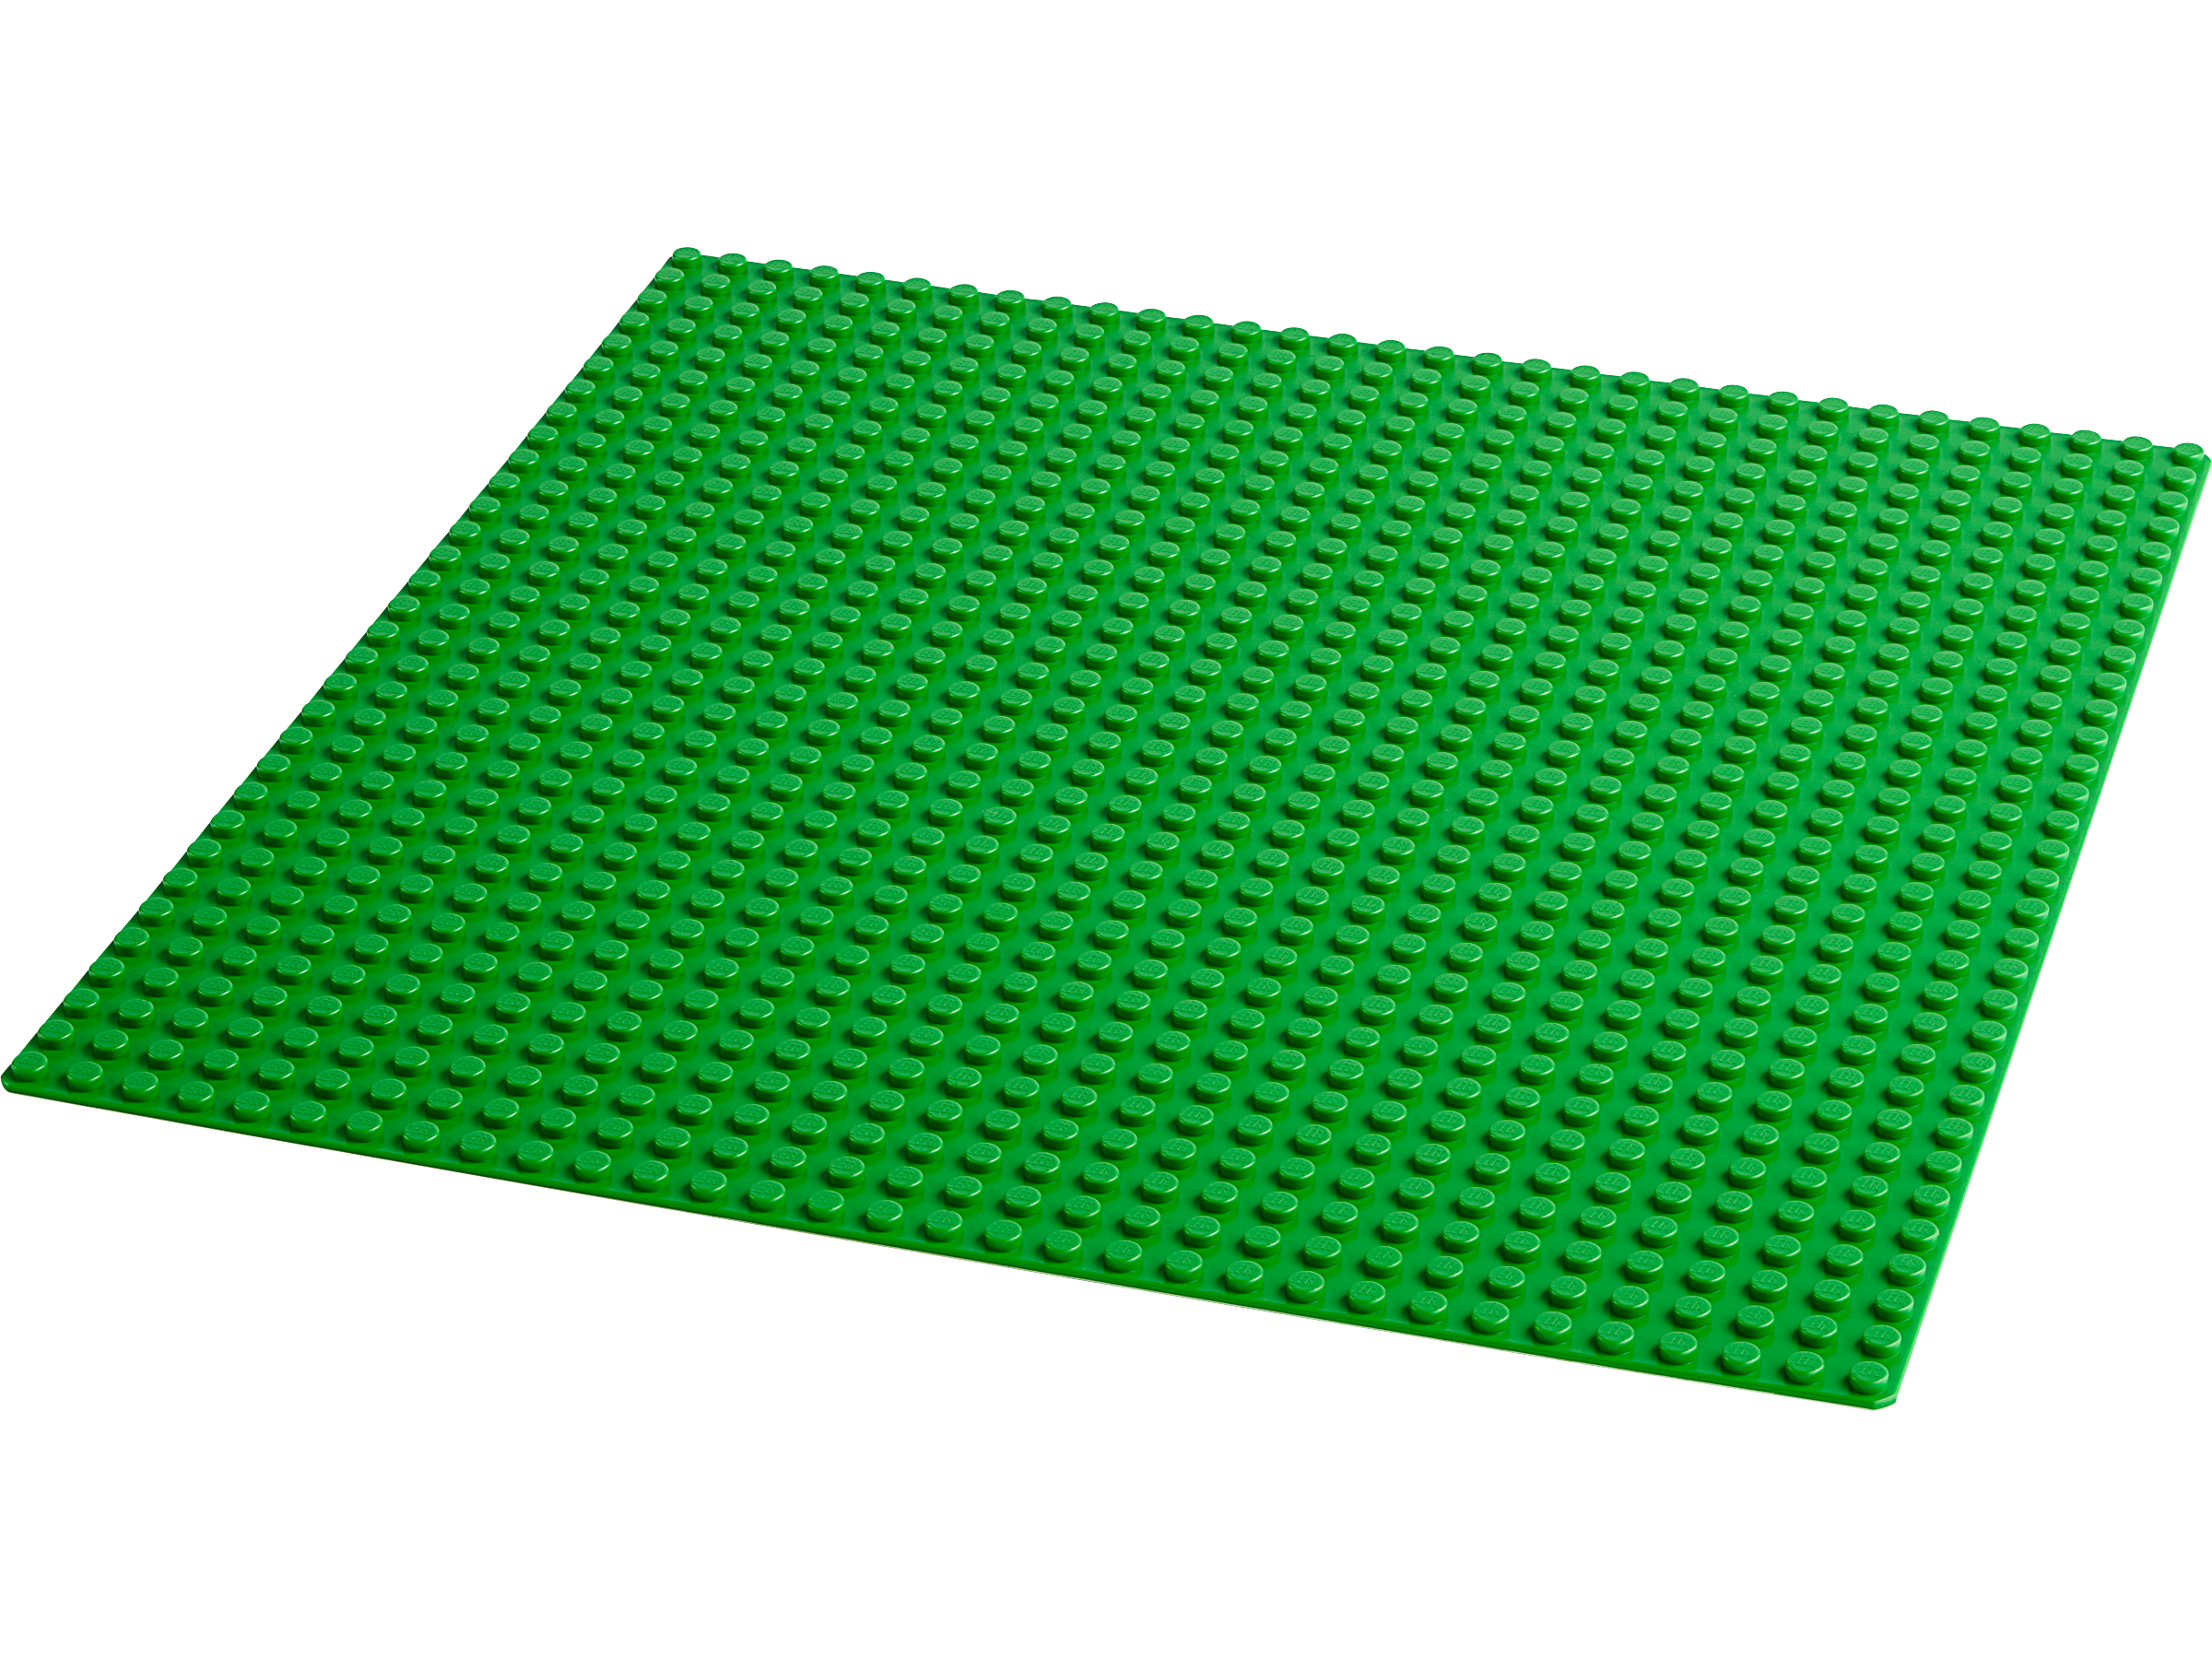 This is a baseplate btw lol